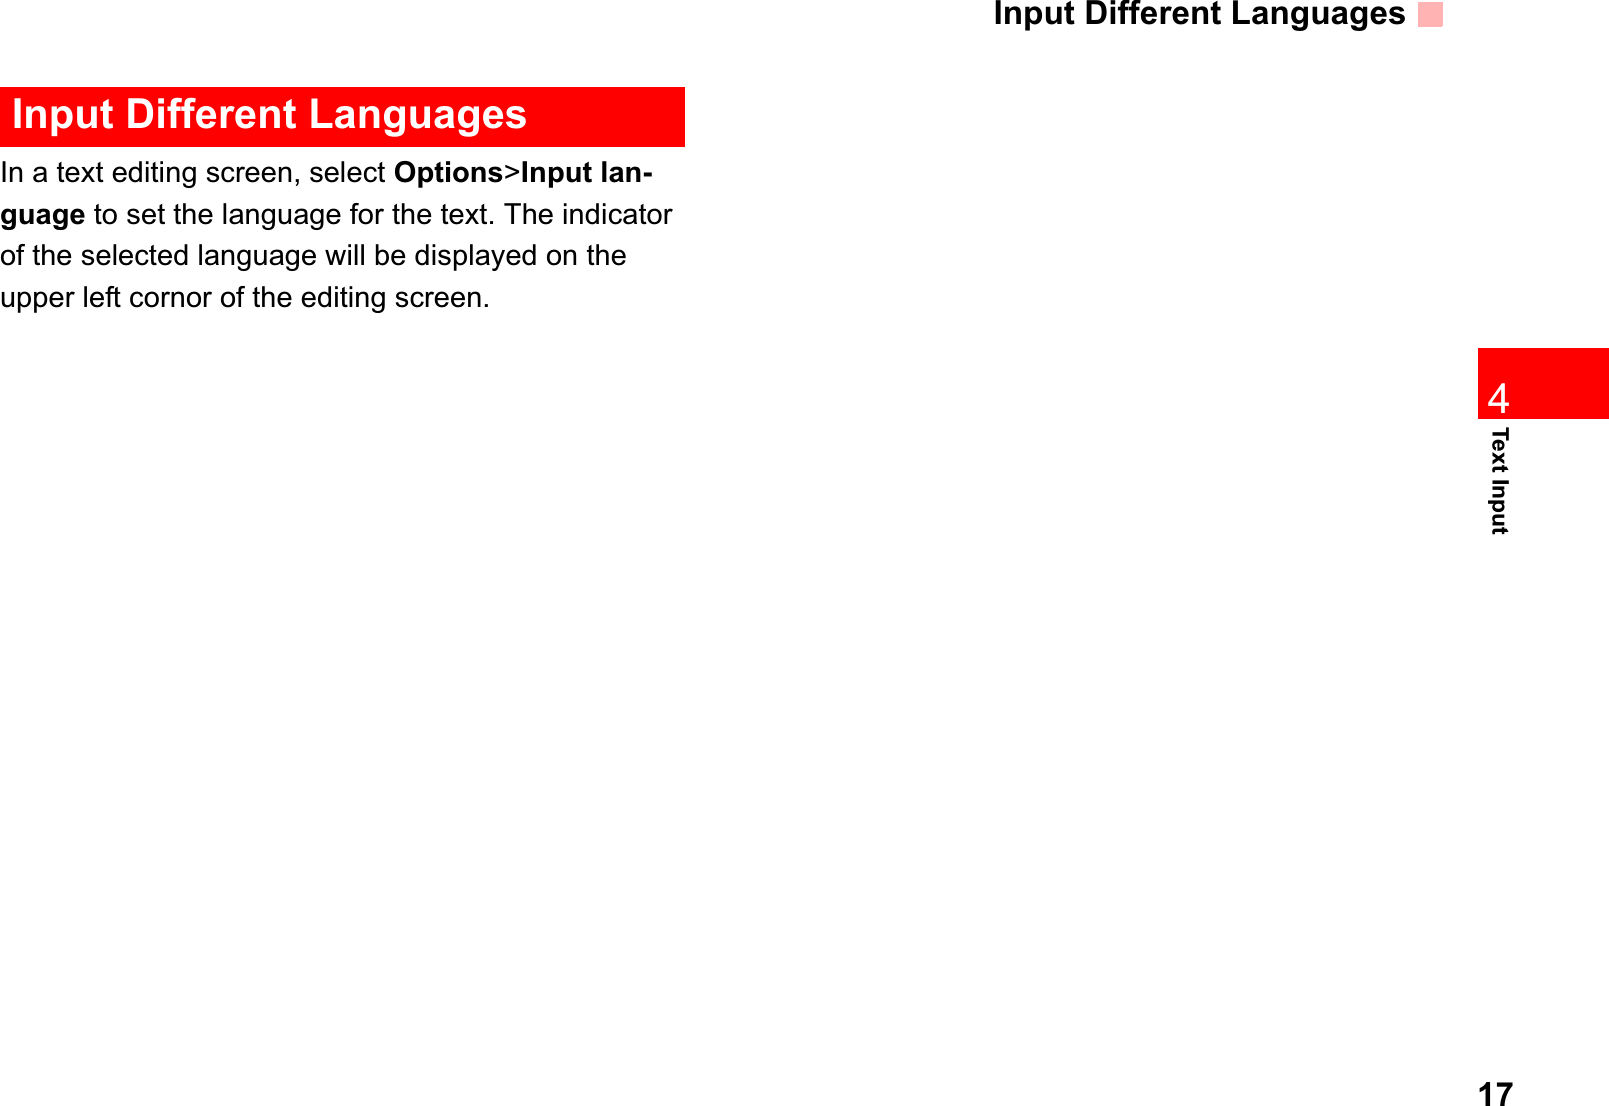 Input Different Languages174Text InputInput Different LanguagesIn a text editing screen, select Options&gt;Input lan-guage to set the language for the text. The indicator of the selected language will be displayed on the upper left cornor of the editing screen. 